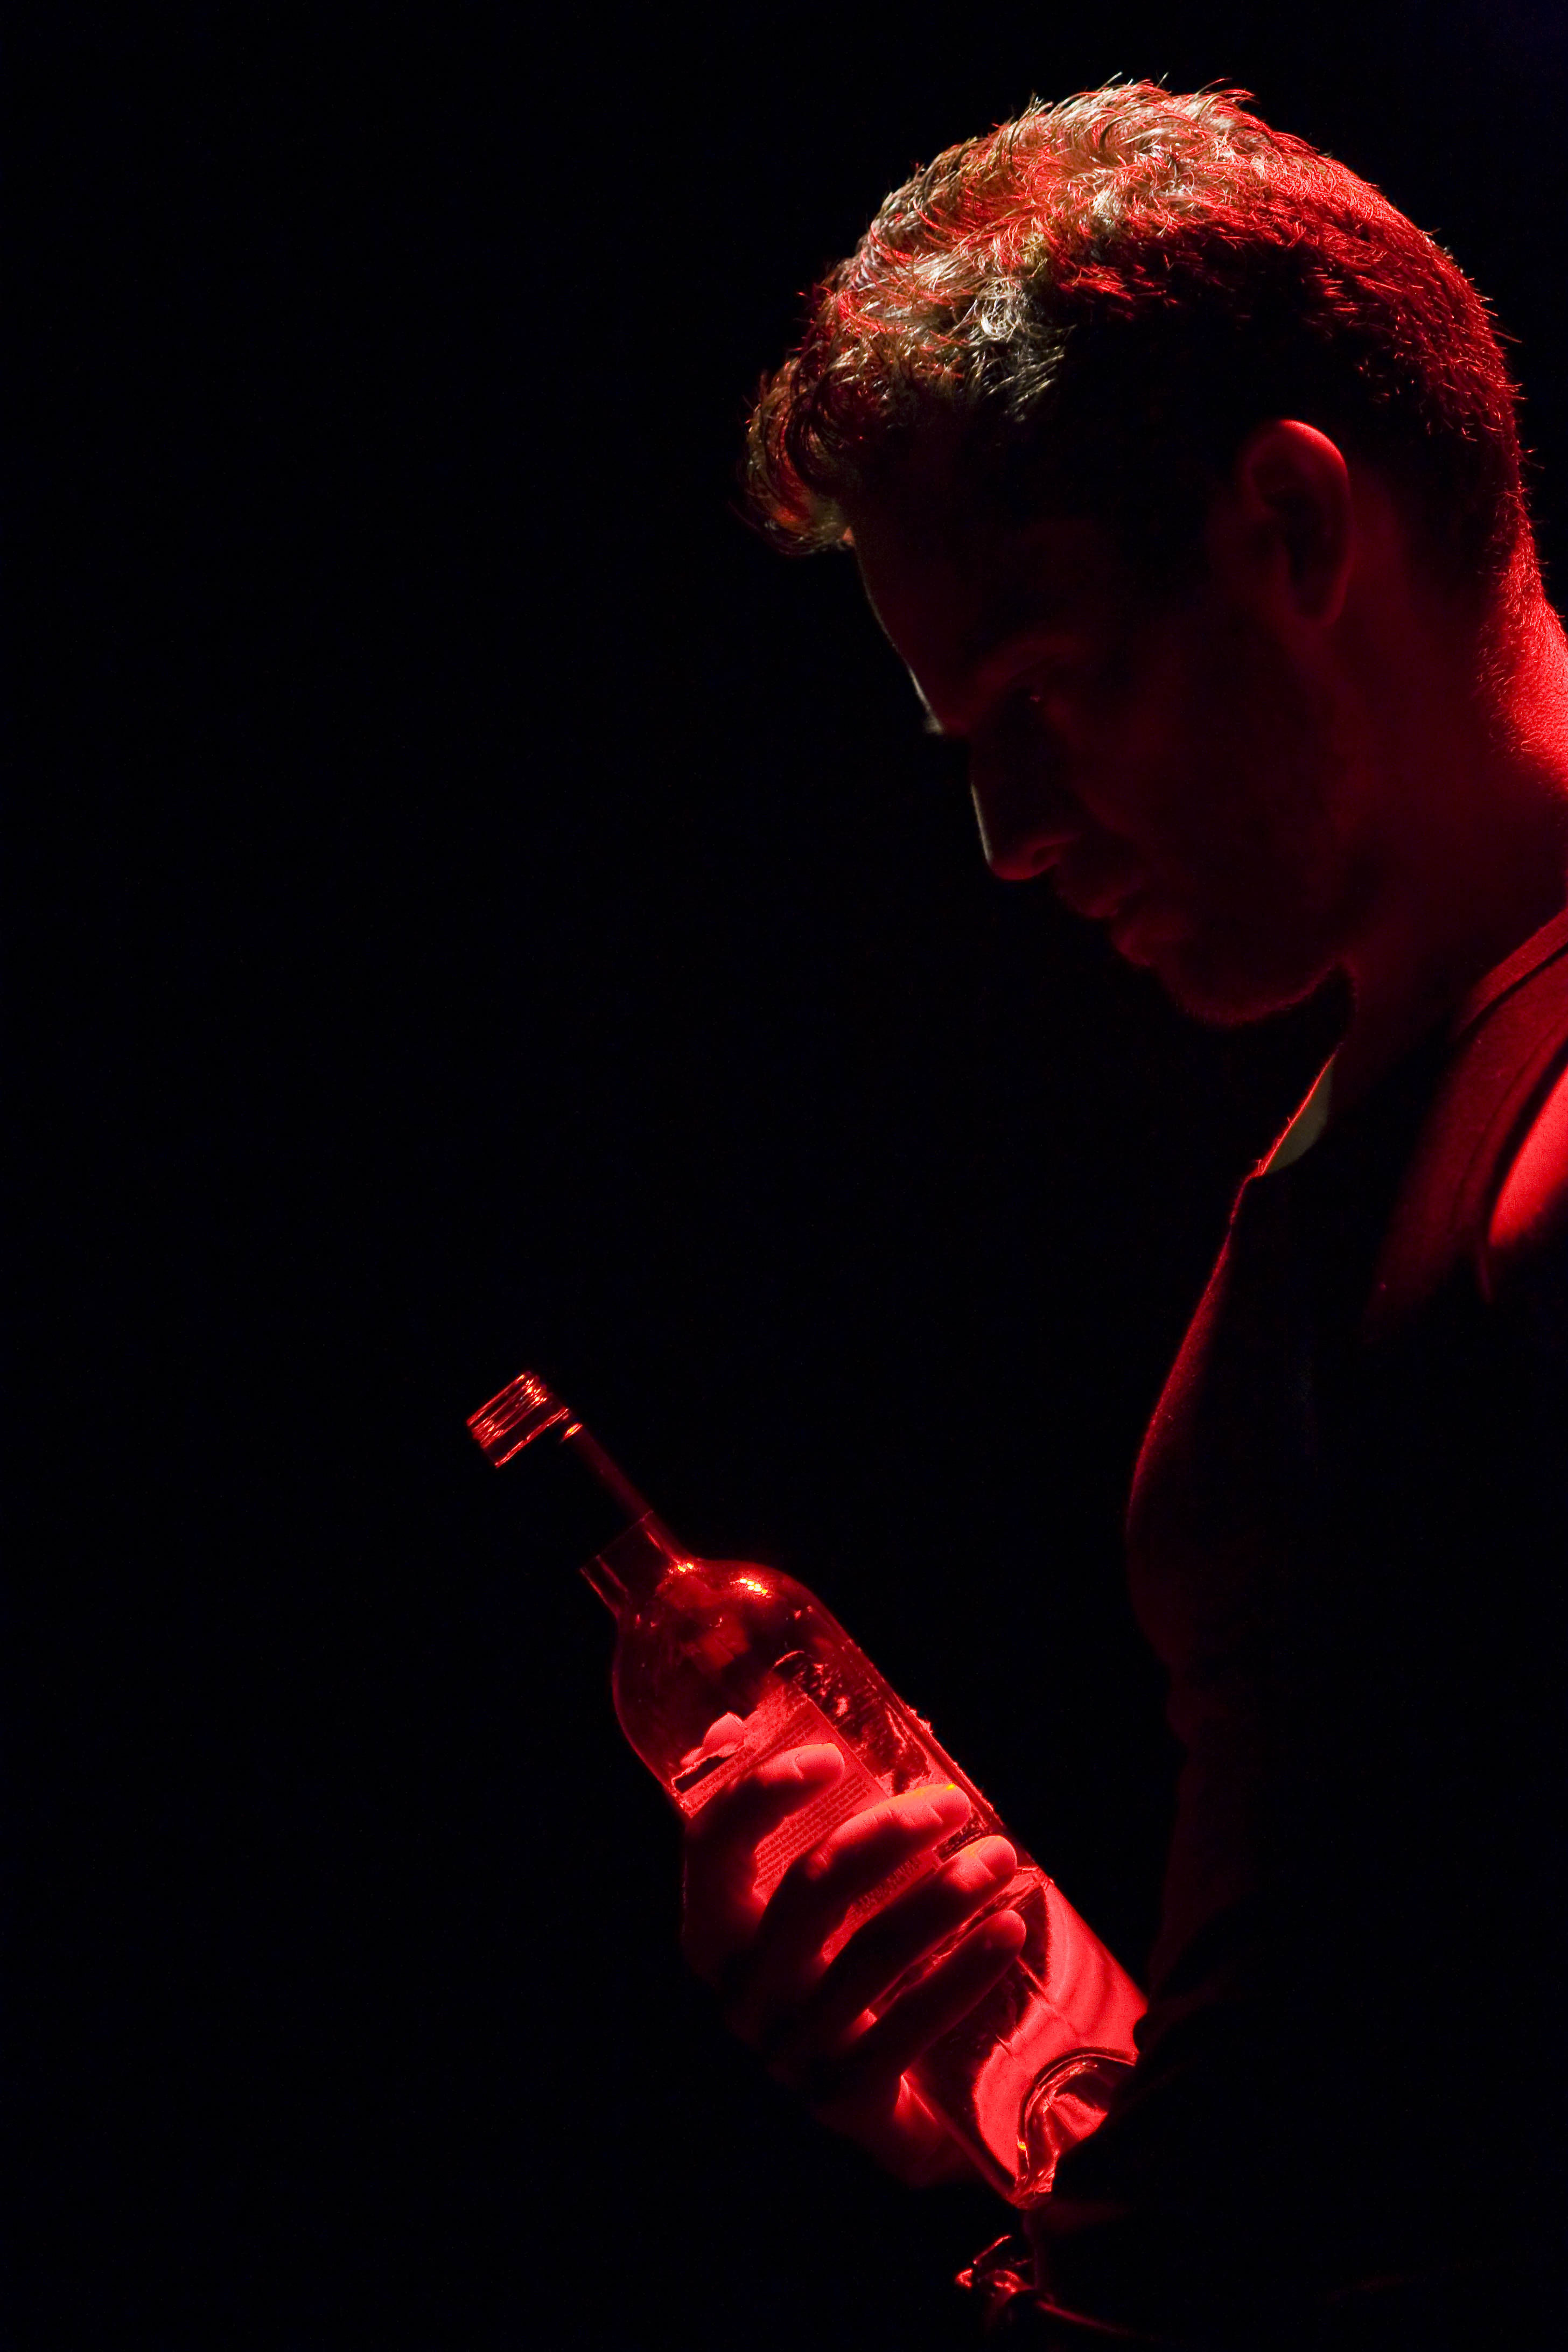 Ryan J-W Smith performing his fourth verse play (one-man show) New World Order in 2008.